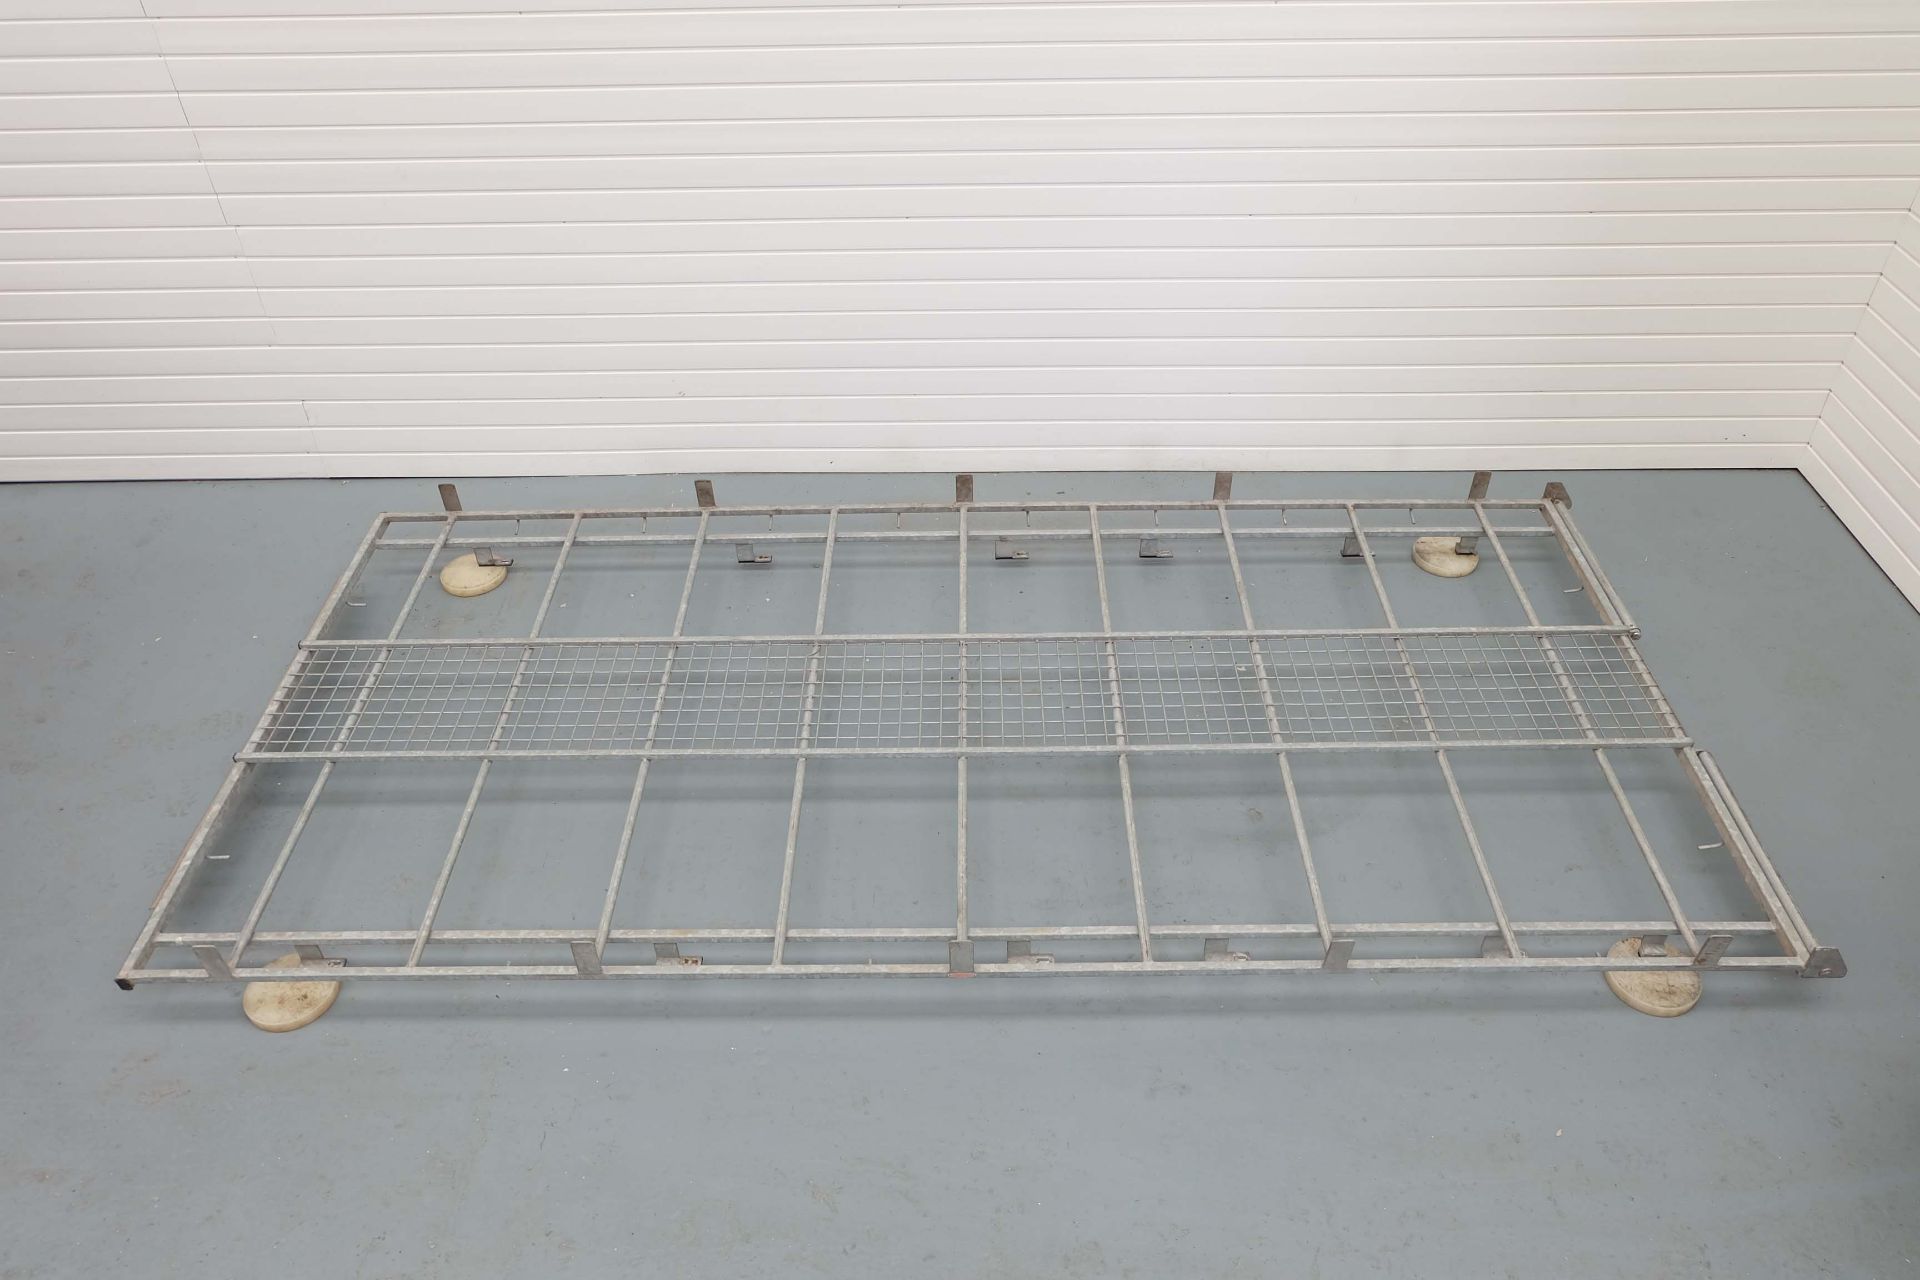 SDV Roof Rack Style 2 With Heavy Duty Runner Mesh. Made From Heavy Duty Galvanised Steel 140" x 68". - Image 2 of 6